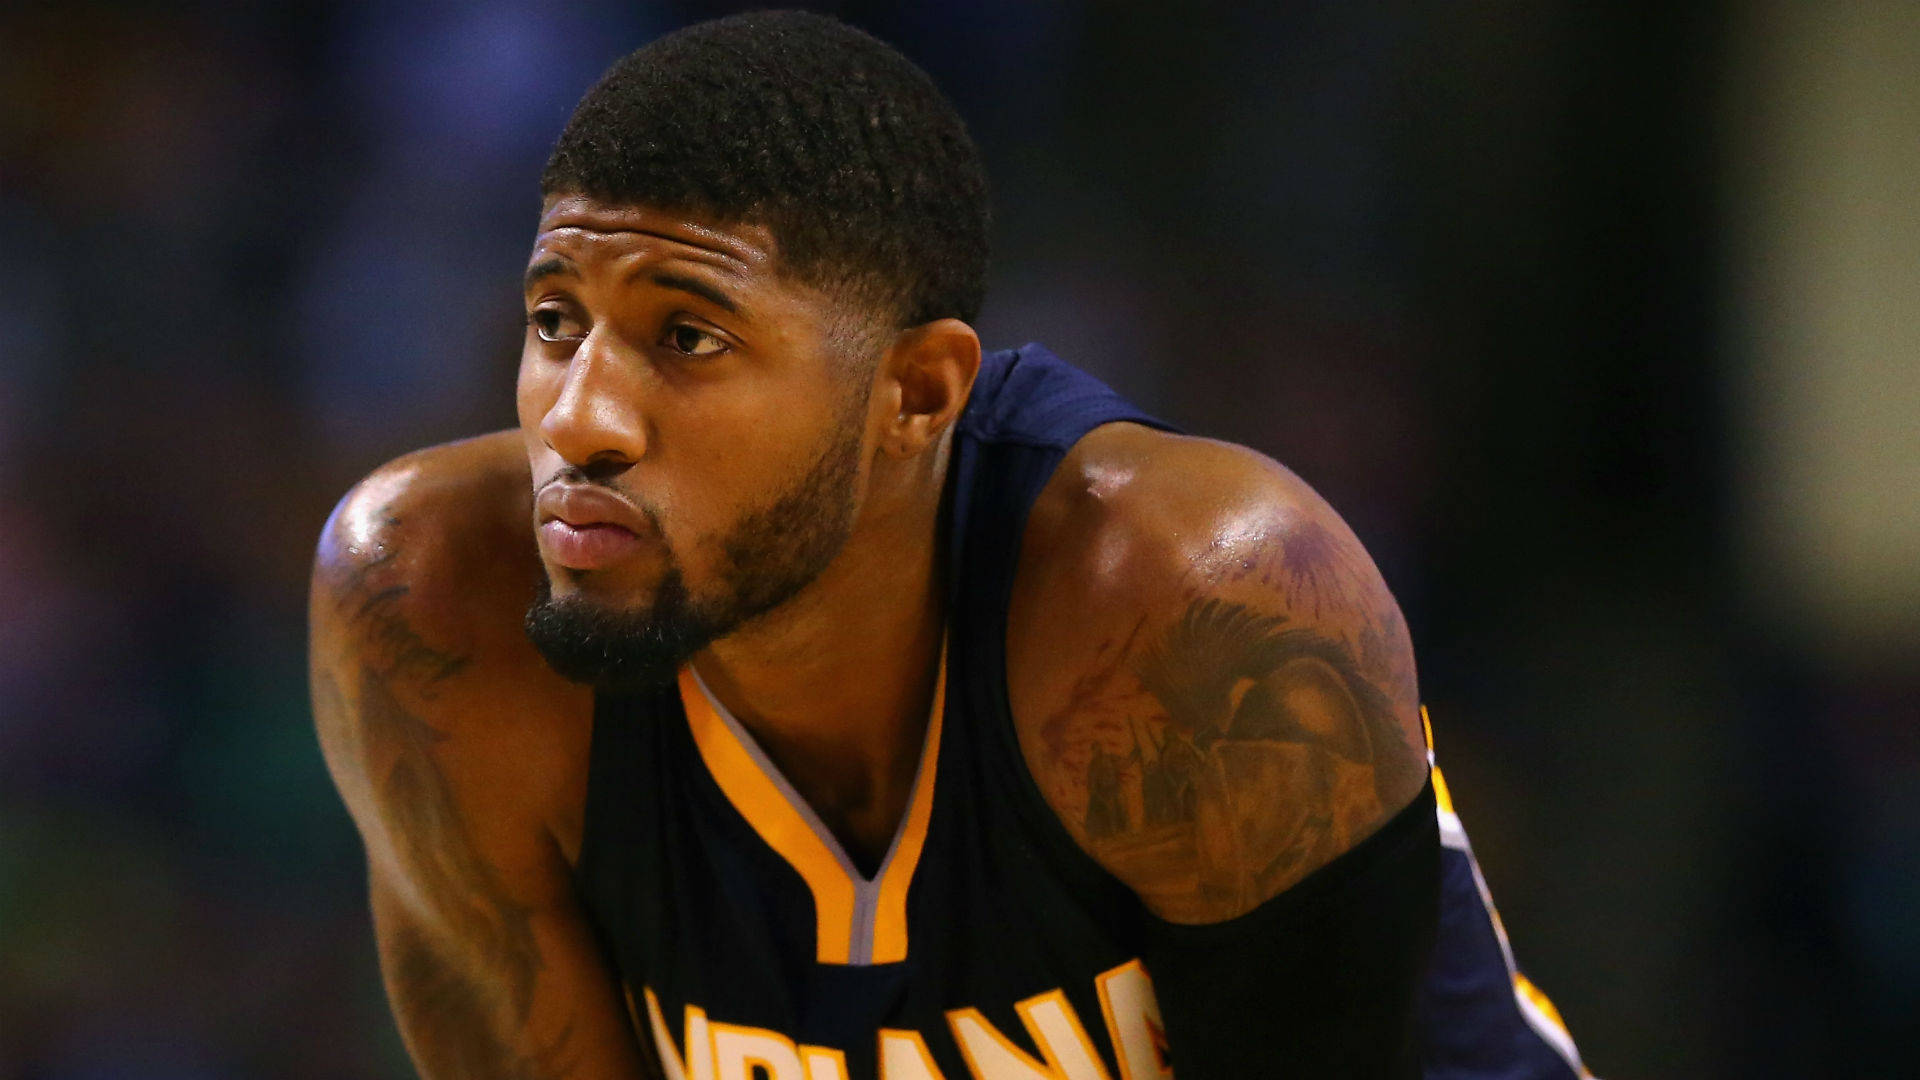 Paul George Showing His Mastery In Basketball